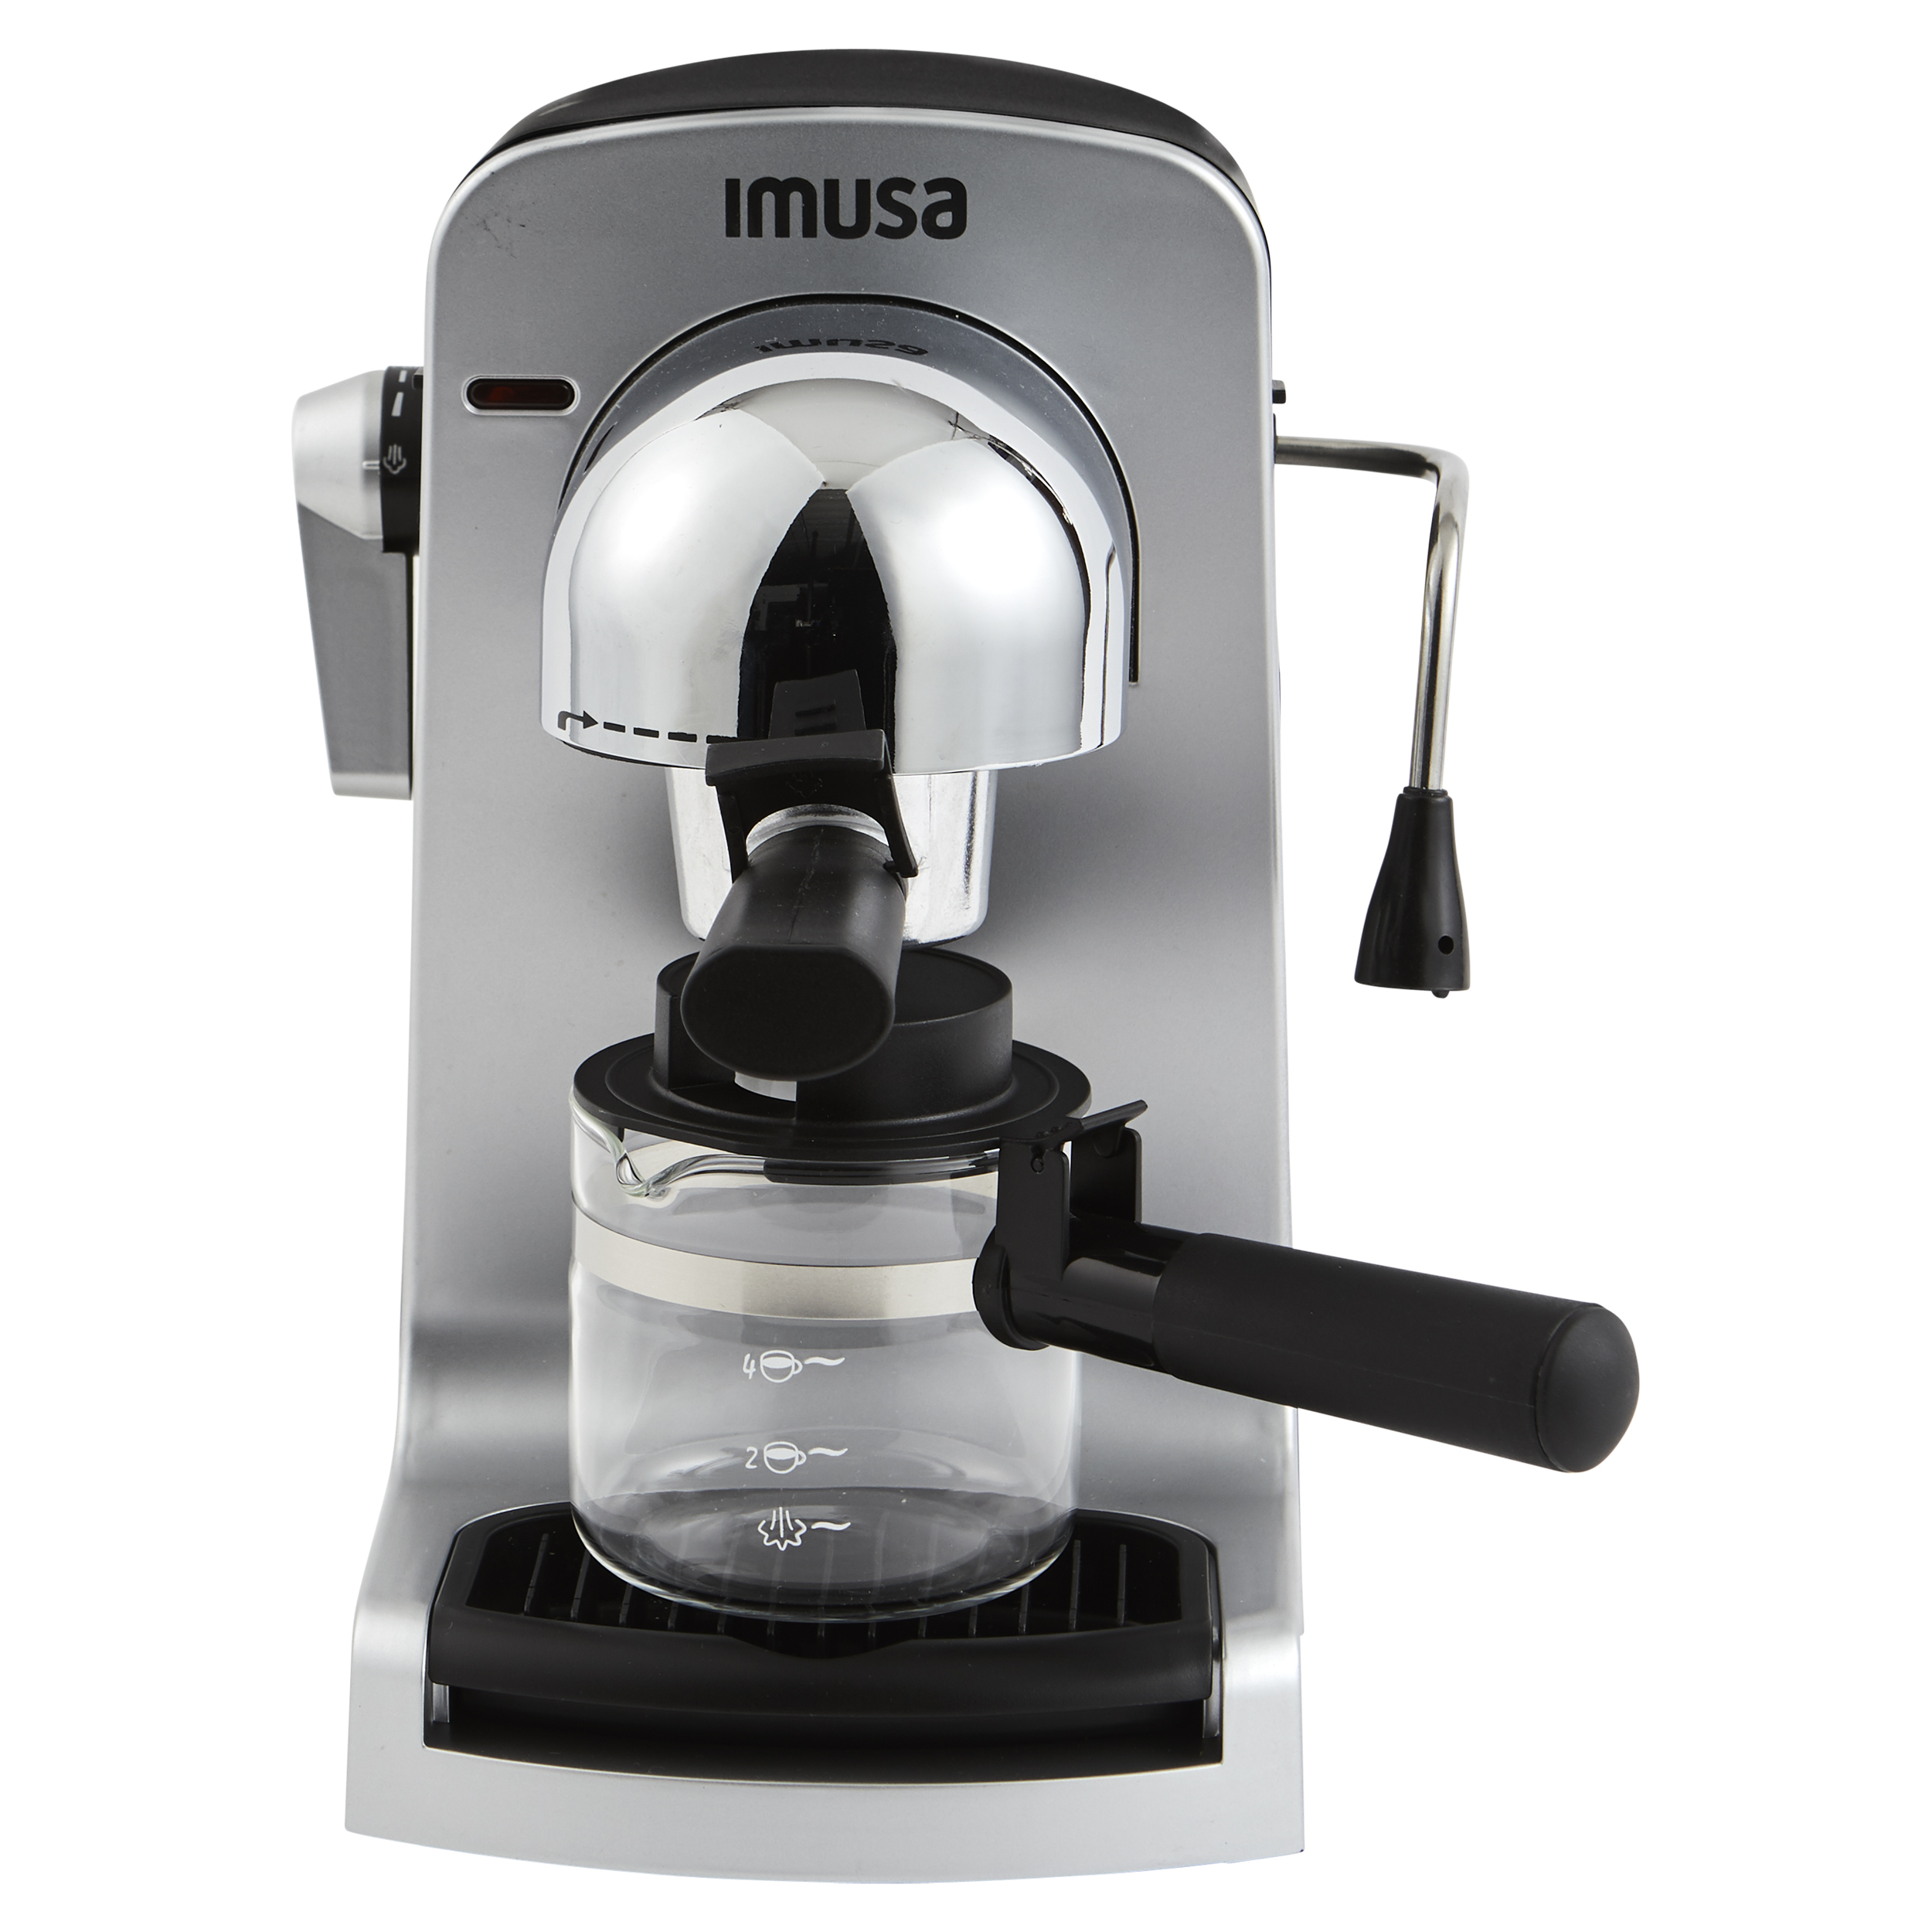 IMUSA IMUSA Electric Moka Maker 3 cup & 6 cup 480 Watts, White Speckled -  IMUSA